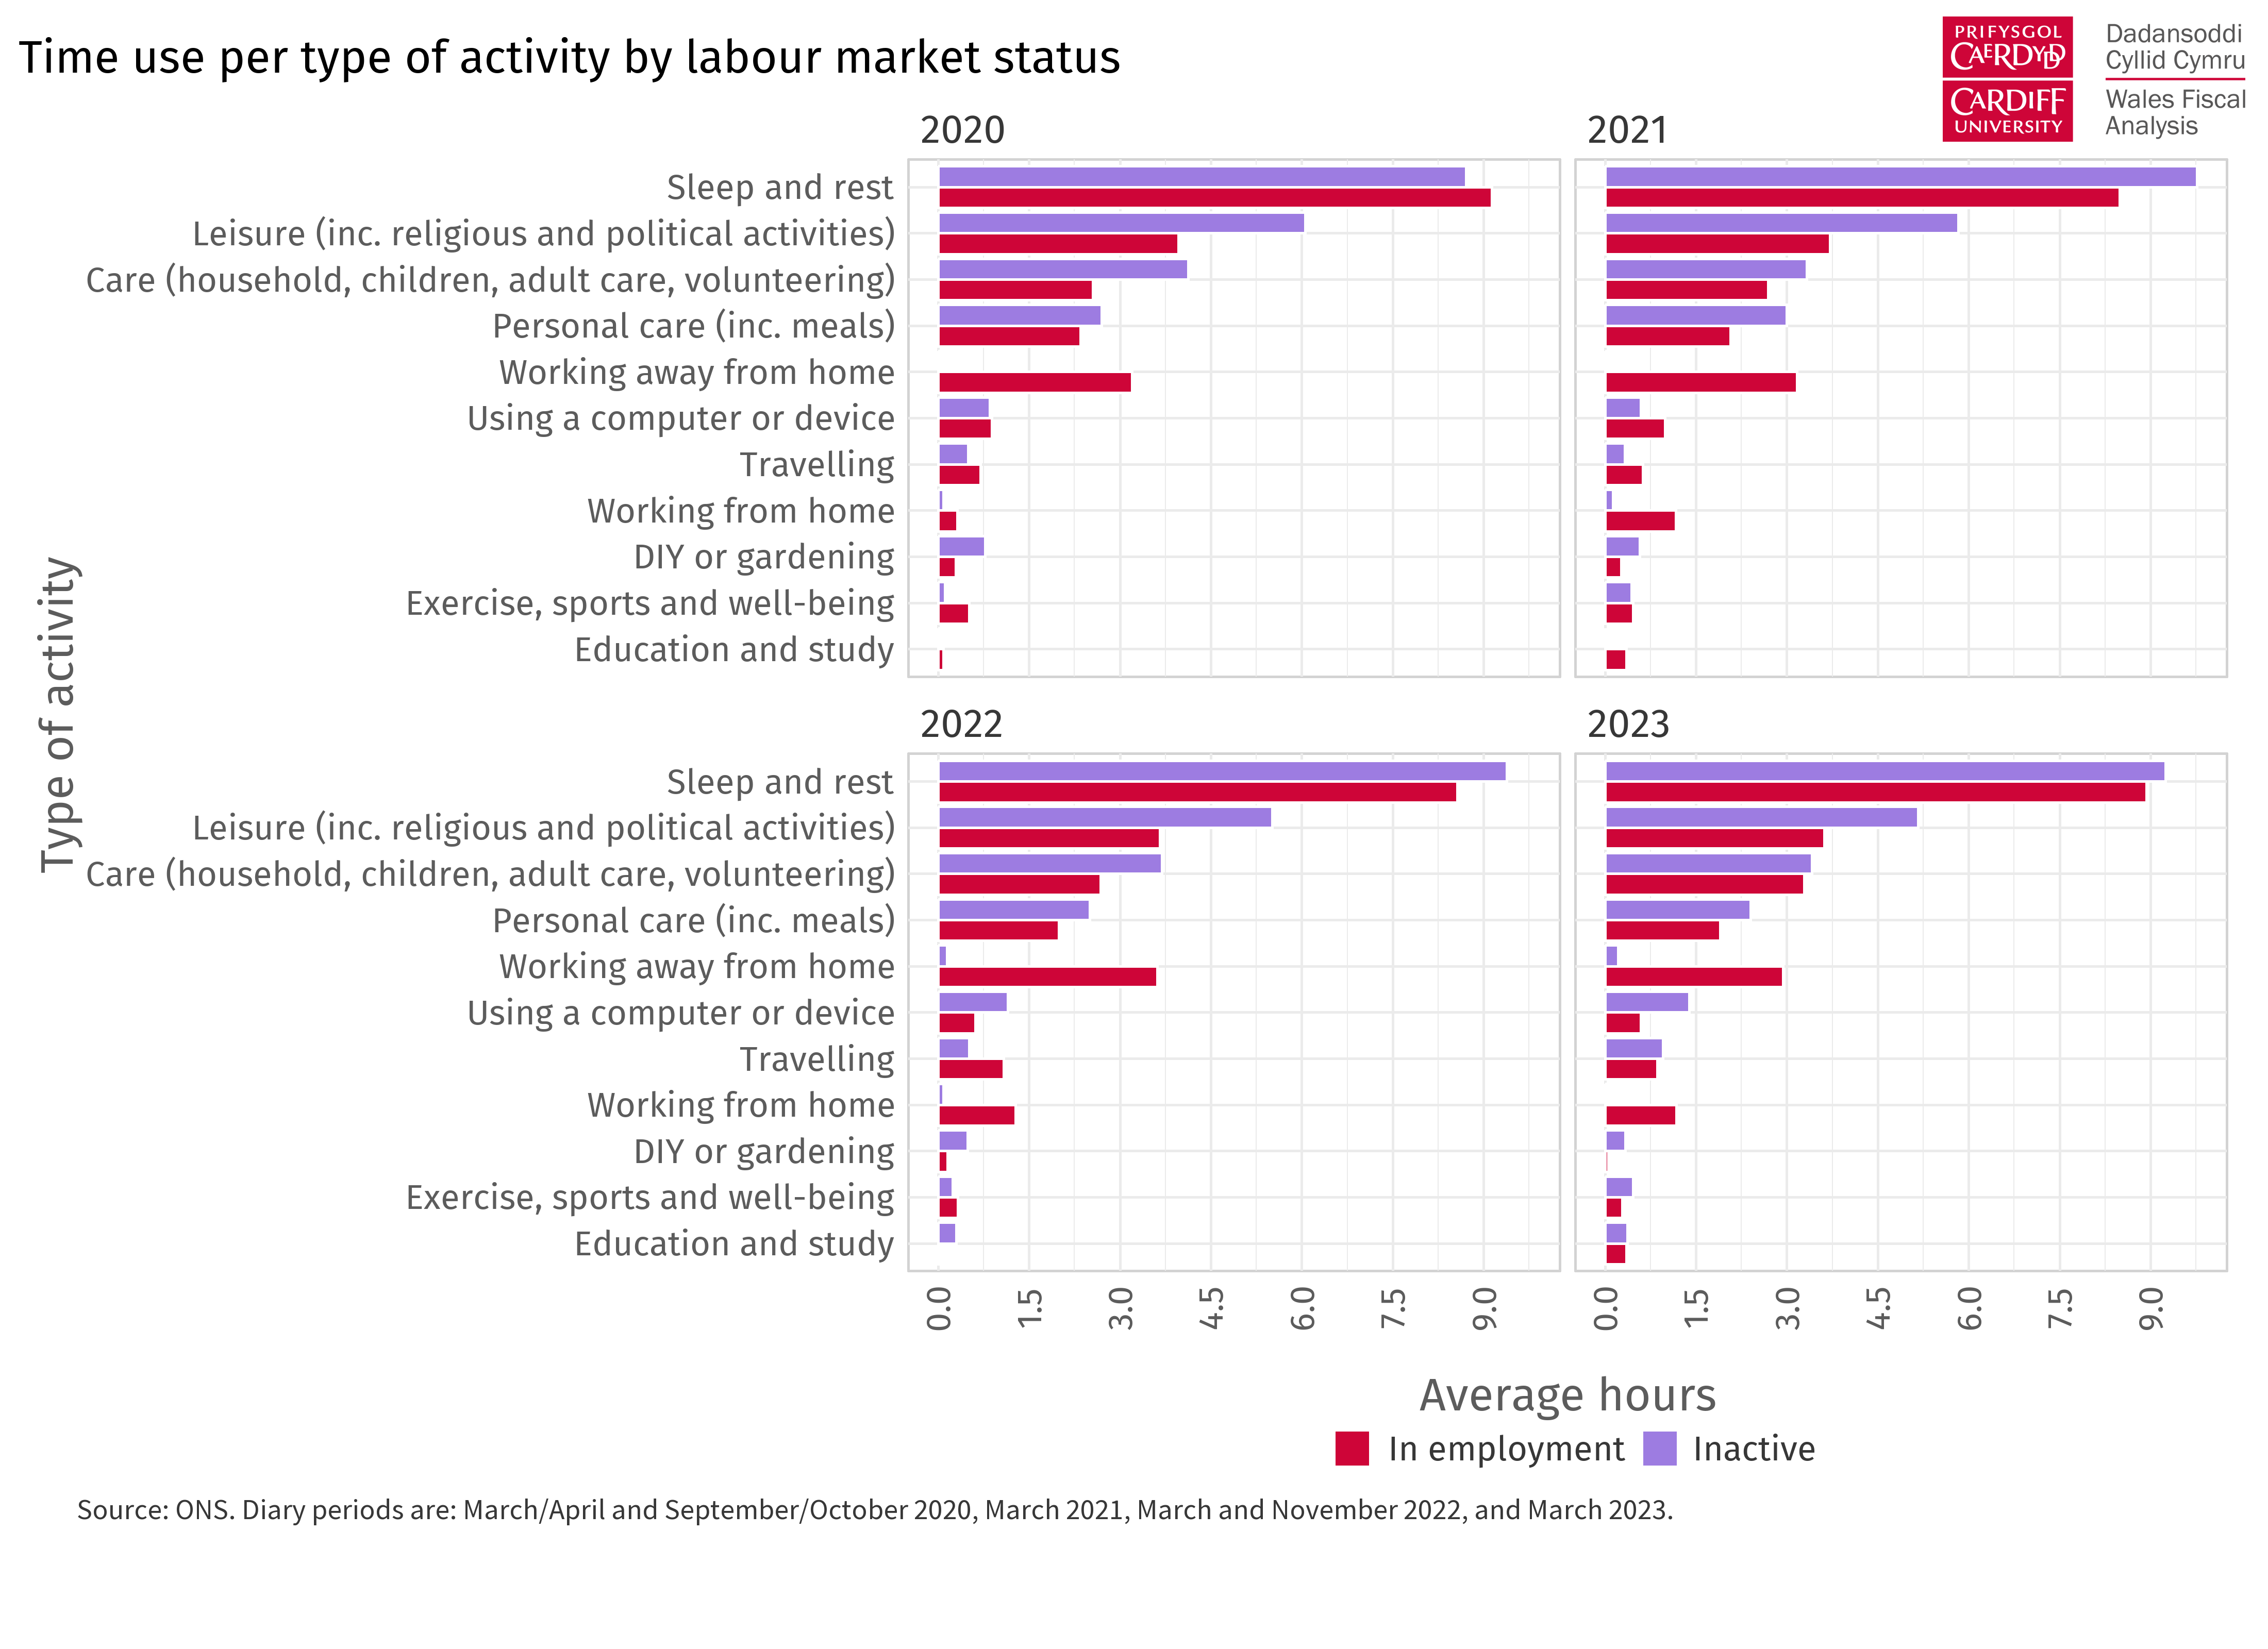 Four horizontal bar charts showing the average hours spent per activity by employment or inactivity status. Each chart refers to a year of the study, 2020, 2021, 2022, 2023.